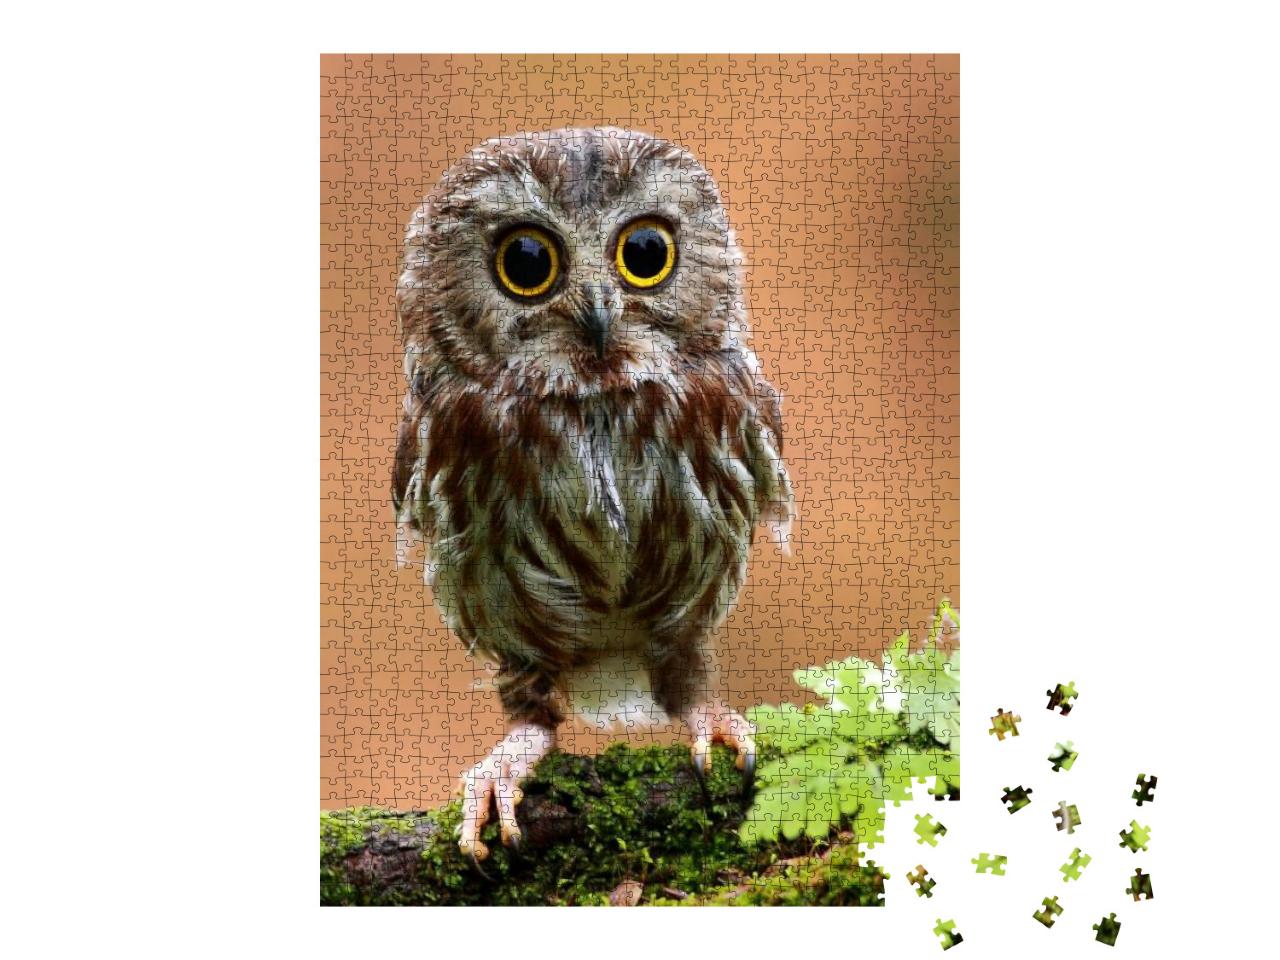 The Cute Lonely Baby of Owl... Jigsaw Puzzle with 1000 pieces